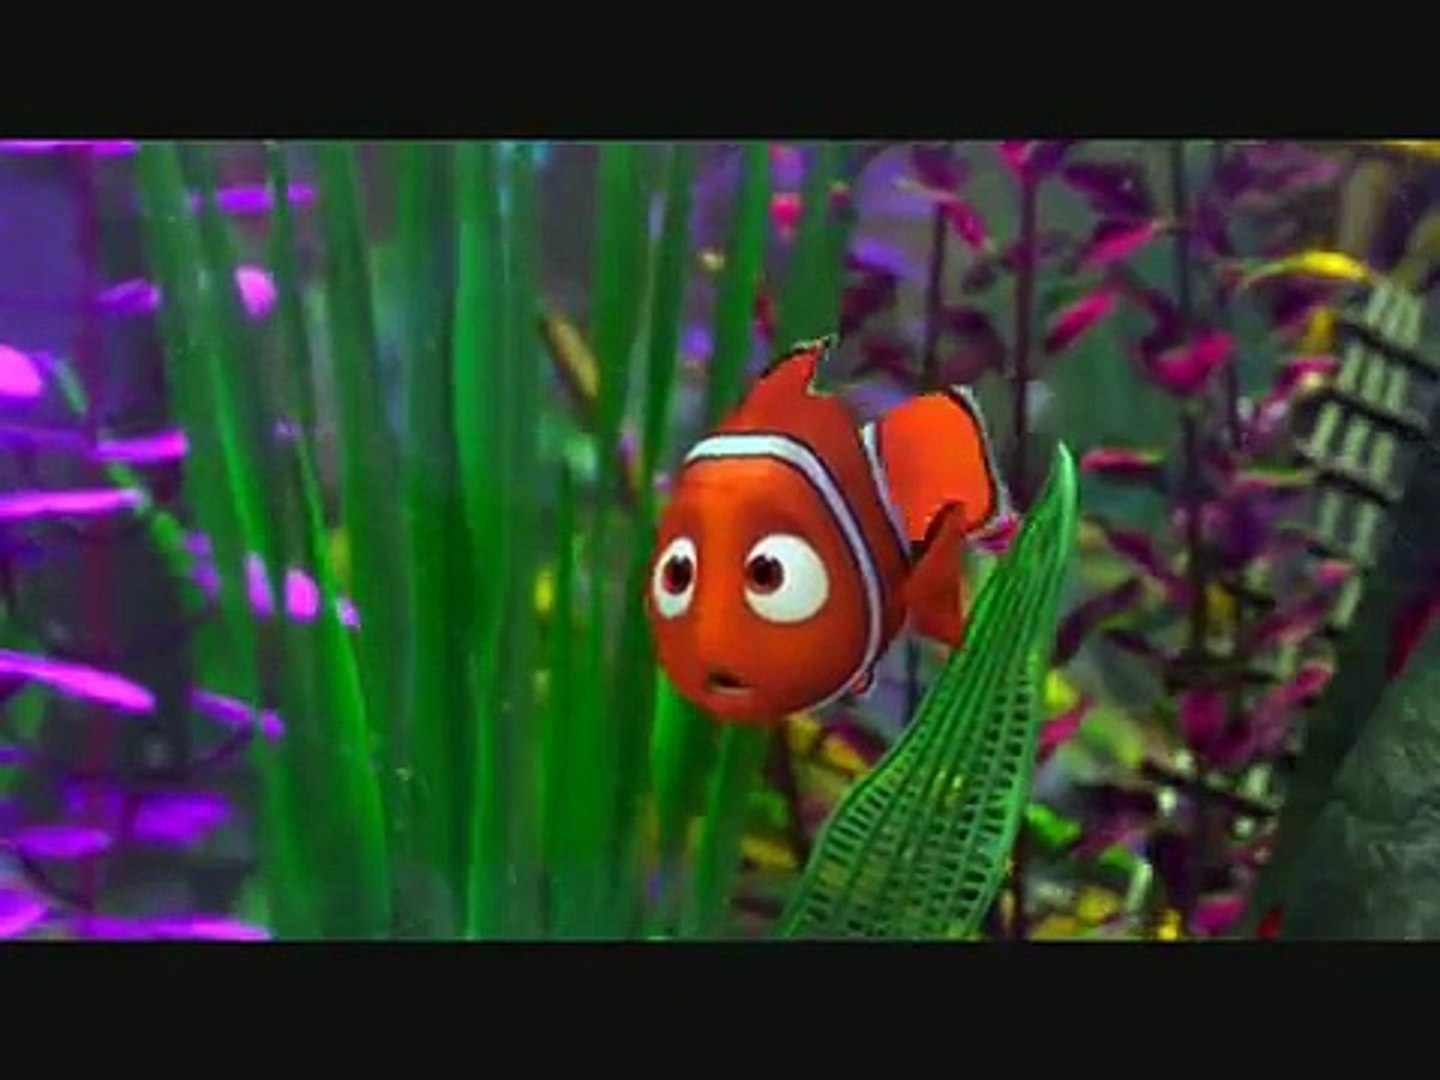 Finding Nemo Music Video- A Thousand Miles